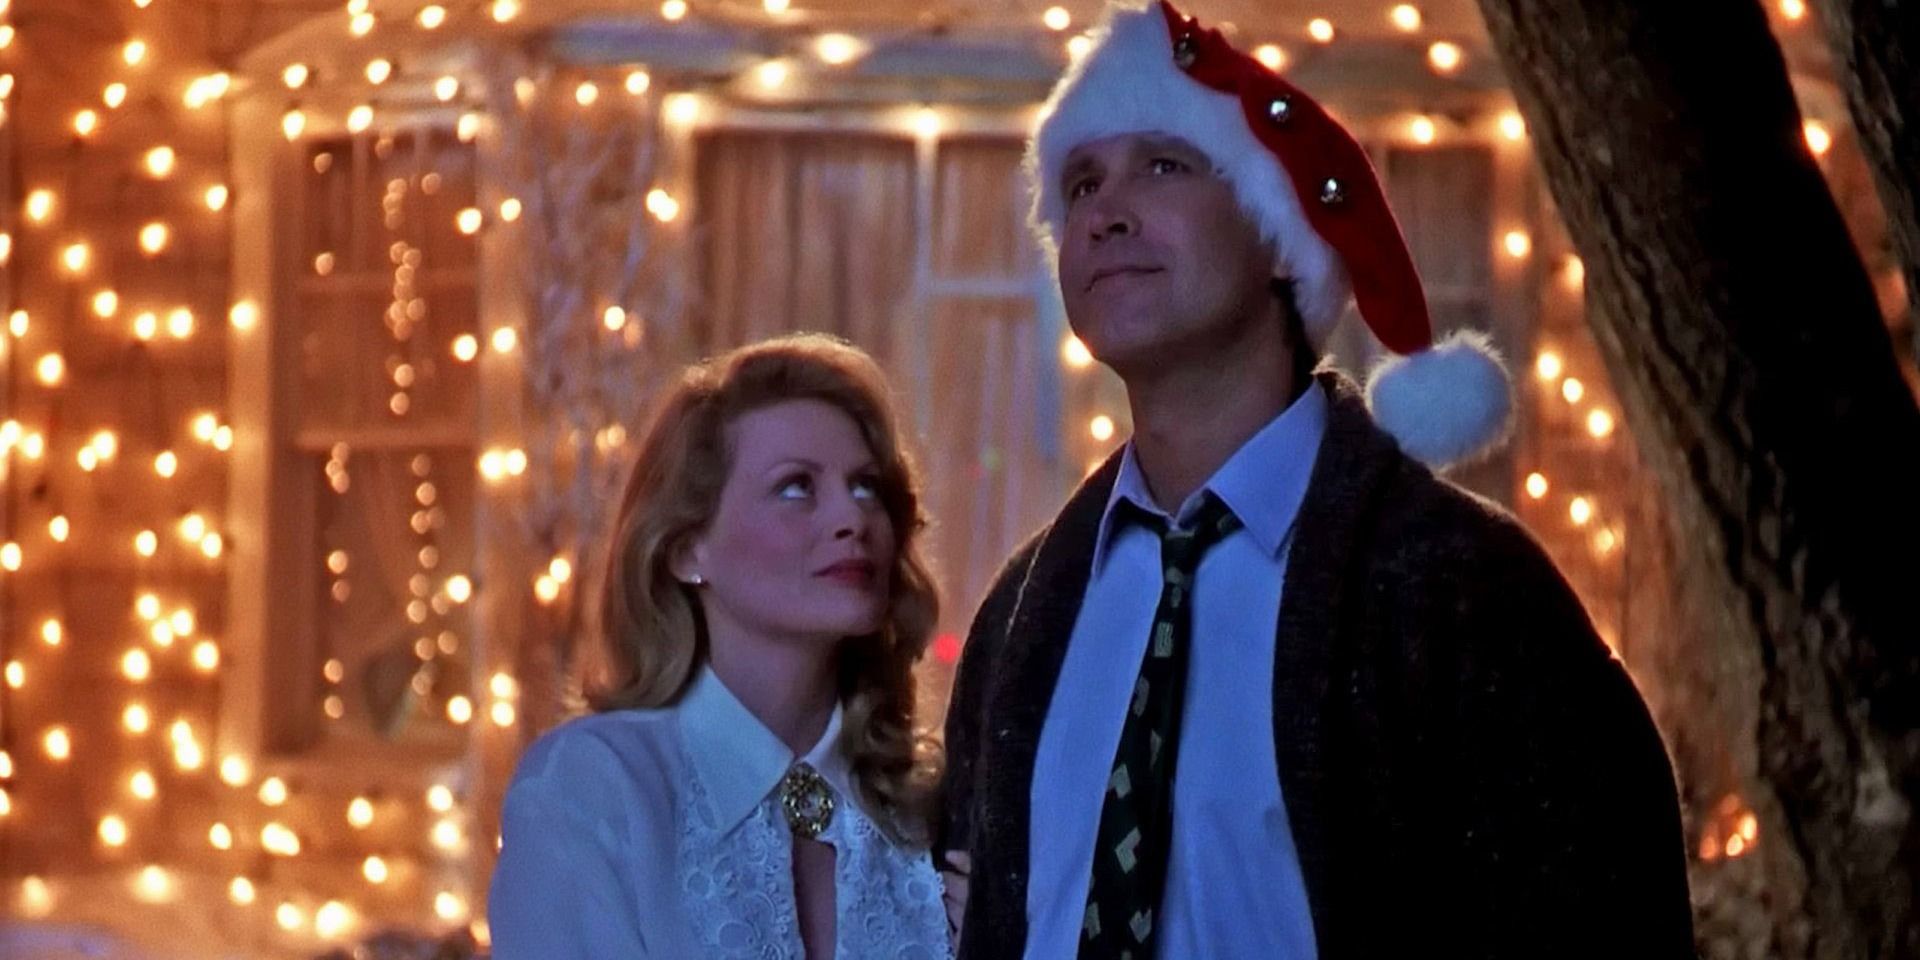 Clark and Ellen looking pleased against a background of Christmas lights in National Lampoon's Christmas Vacation